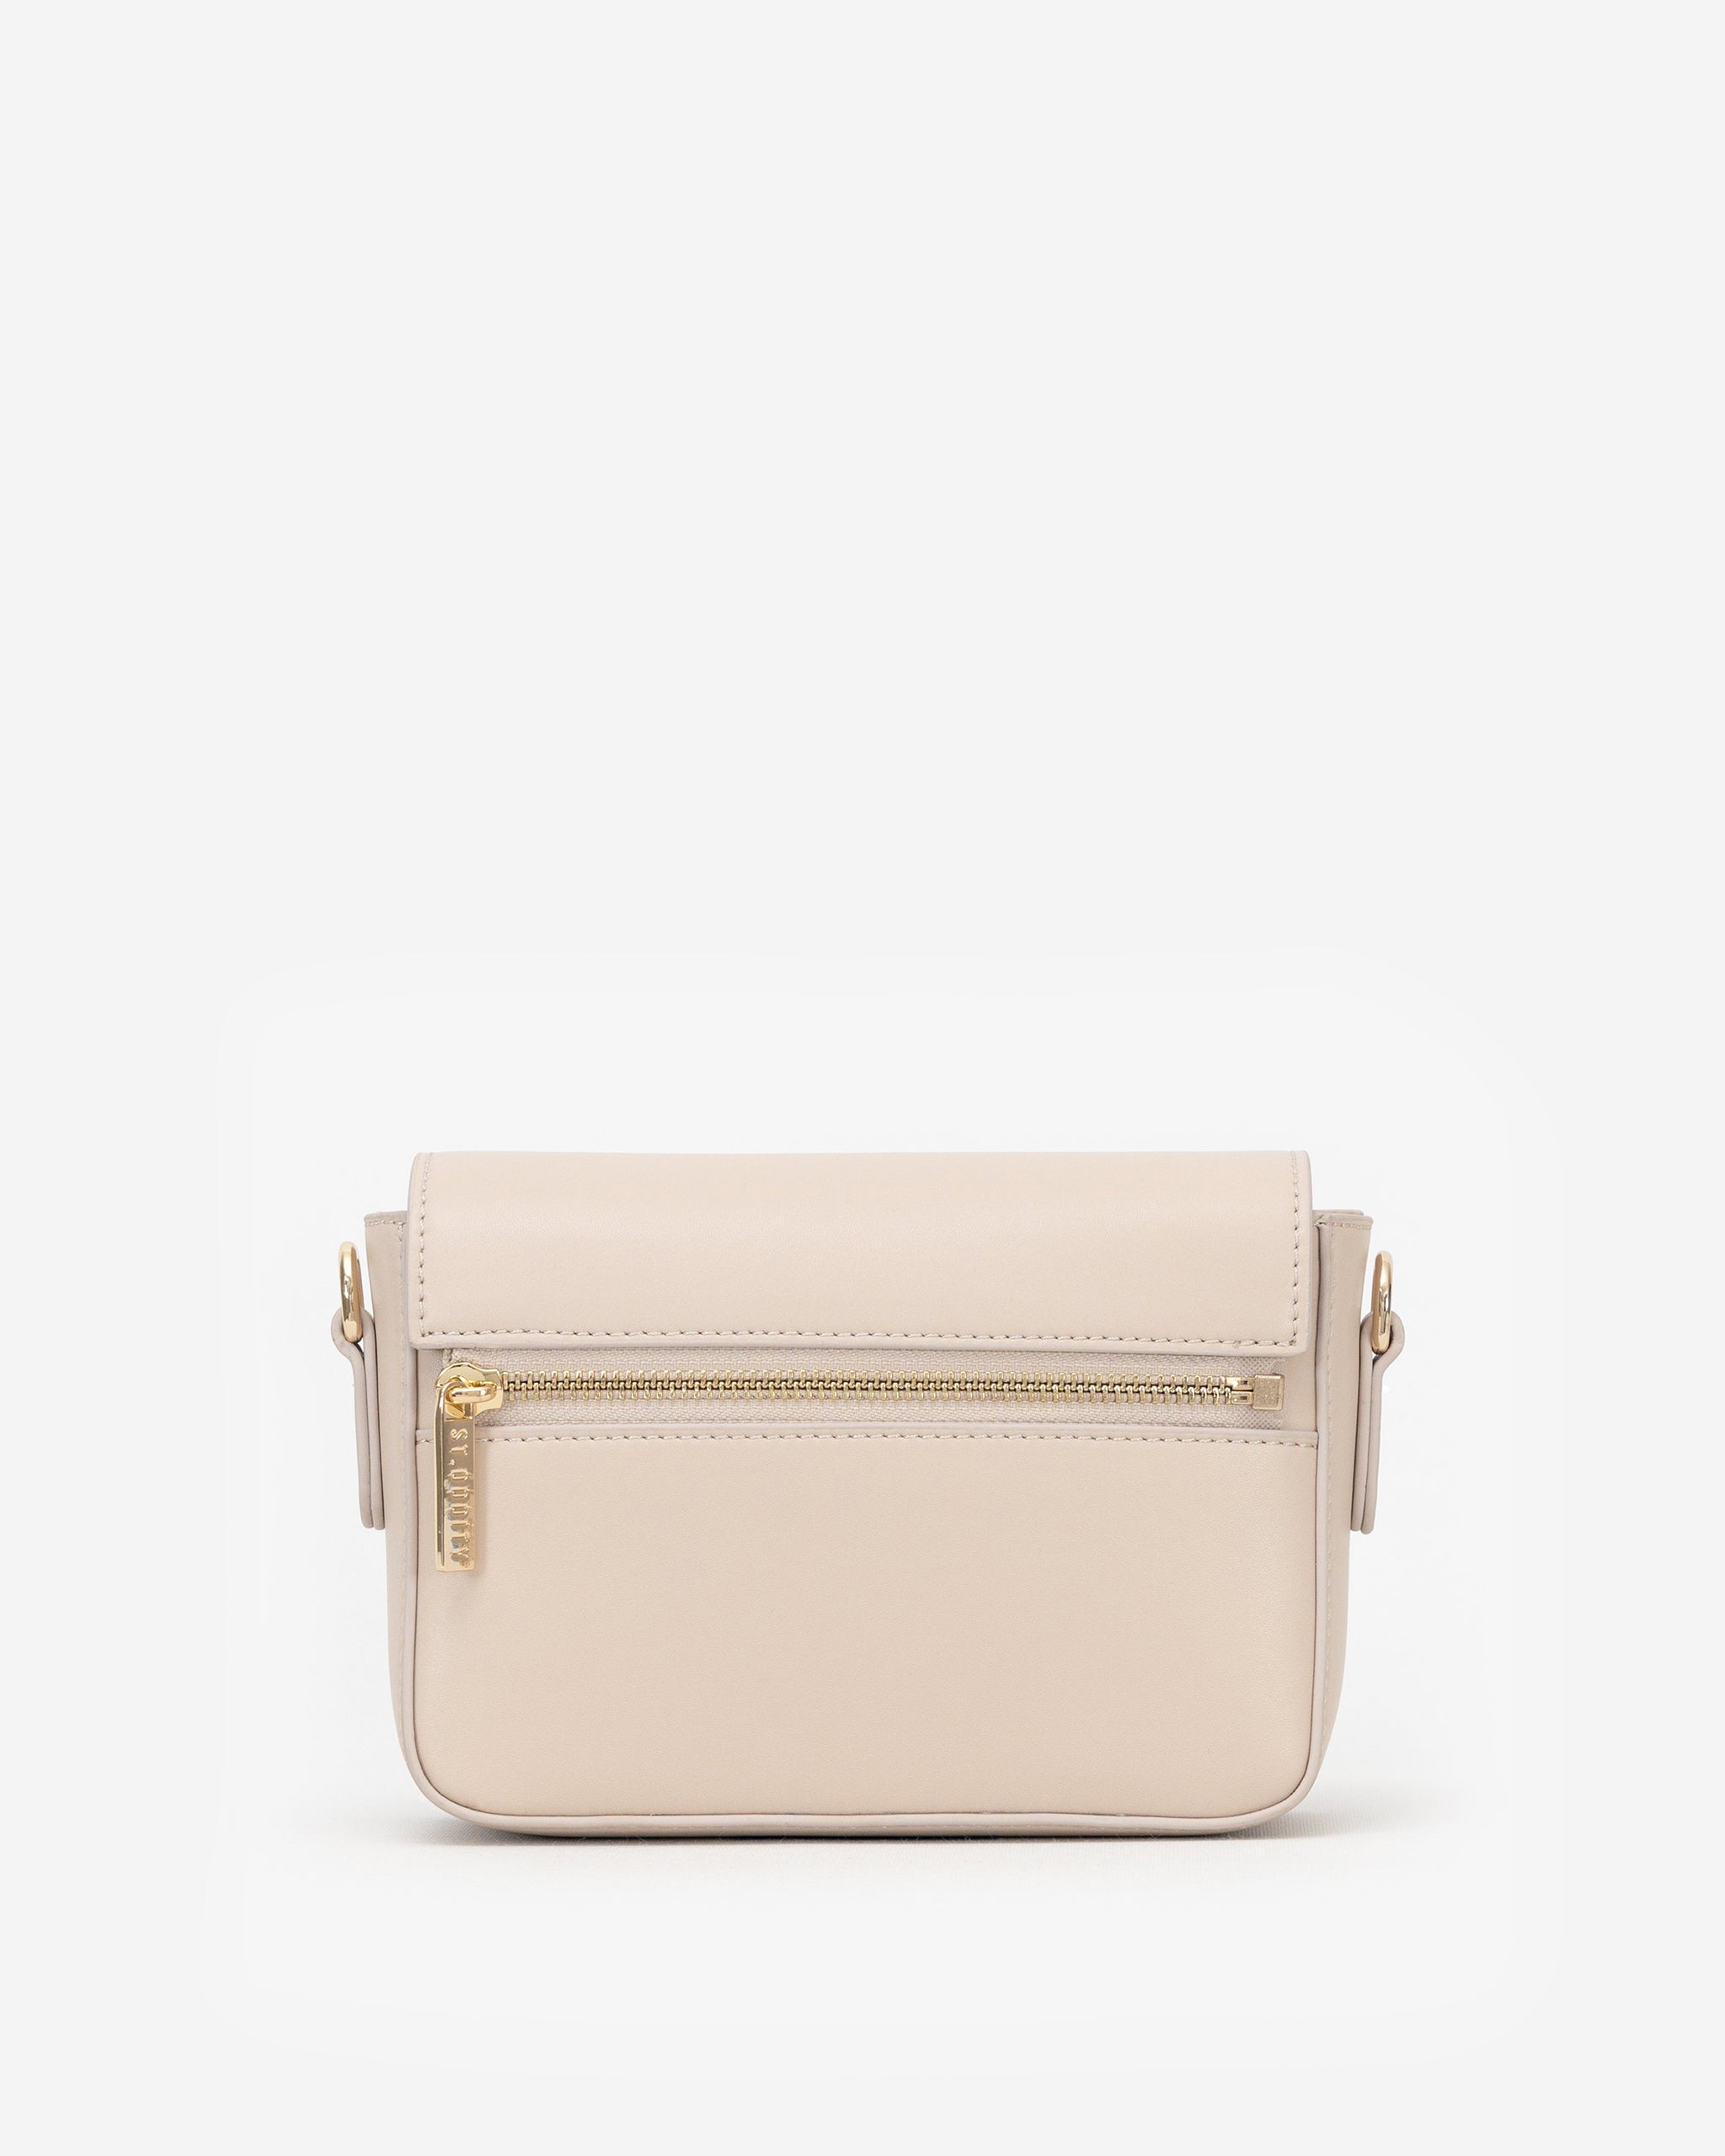 Crossbody Bag with Street Strap in Light Sand